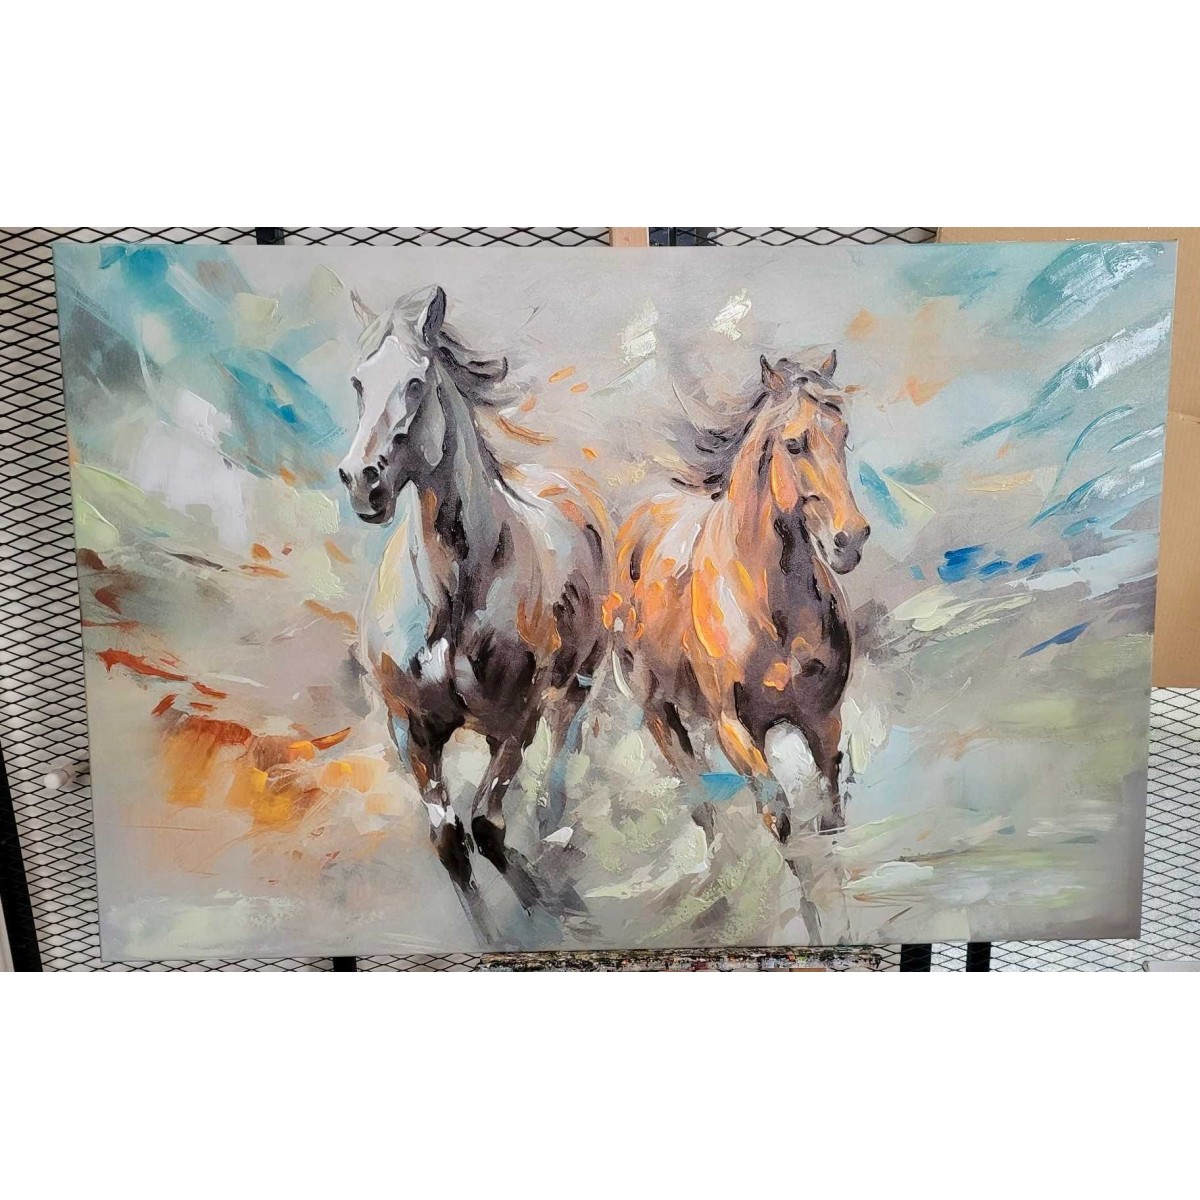 Running Horses Textured Partial Oil Painting